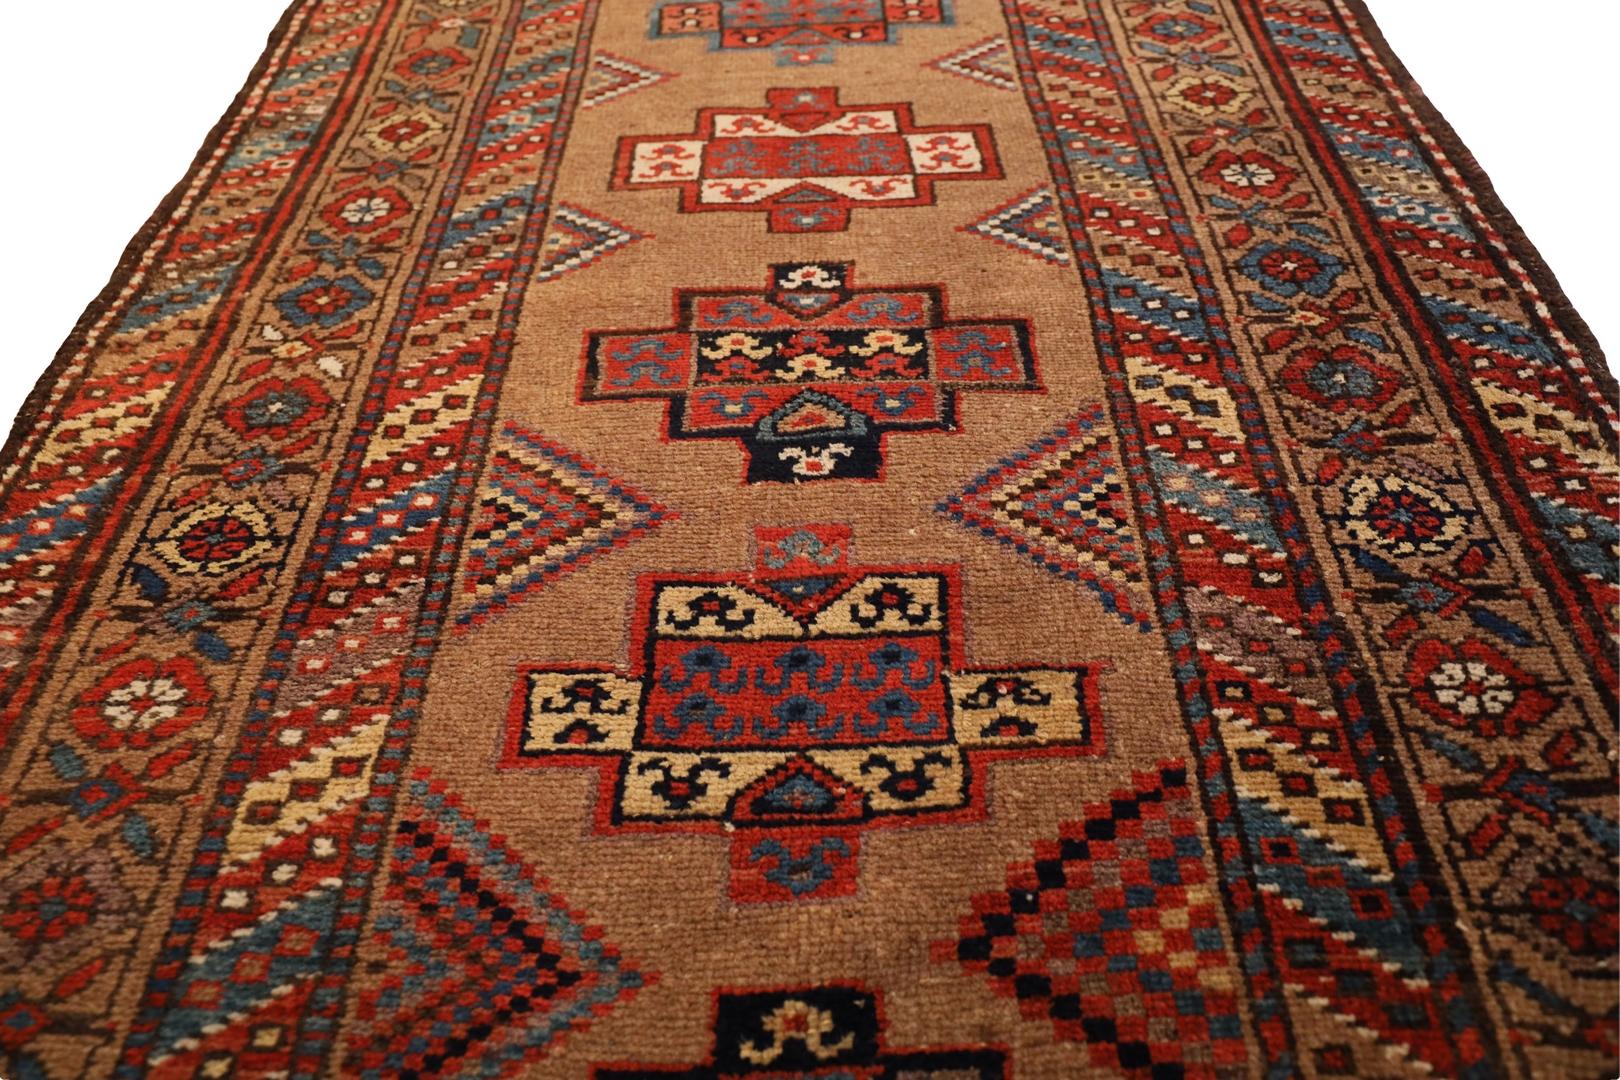 Mid-20th Century Camel-Hair Malayer Antique runner - 3'5